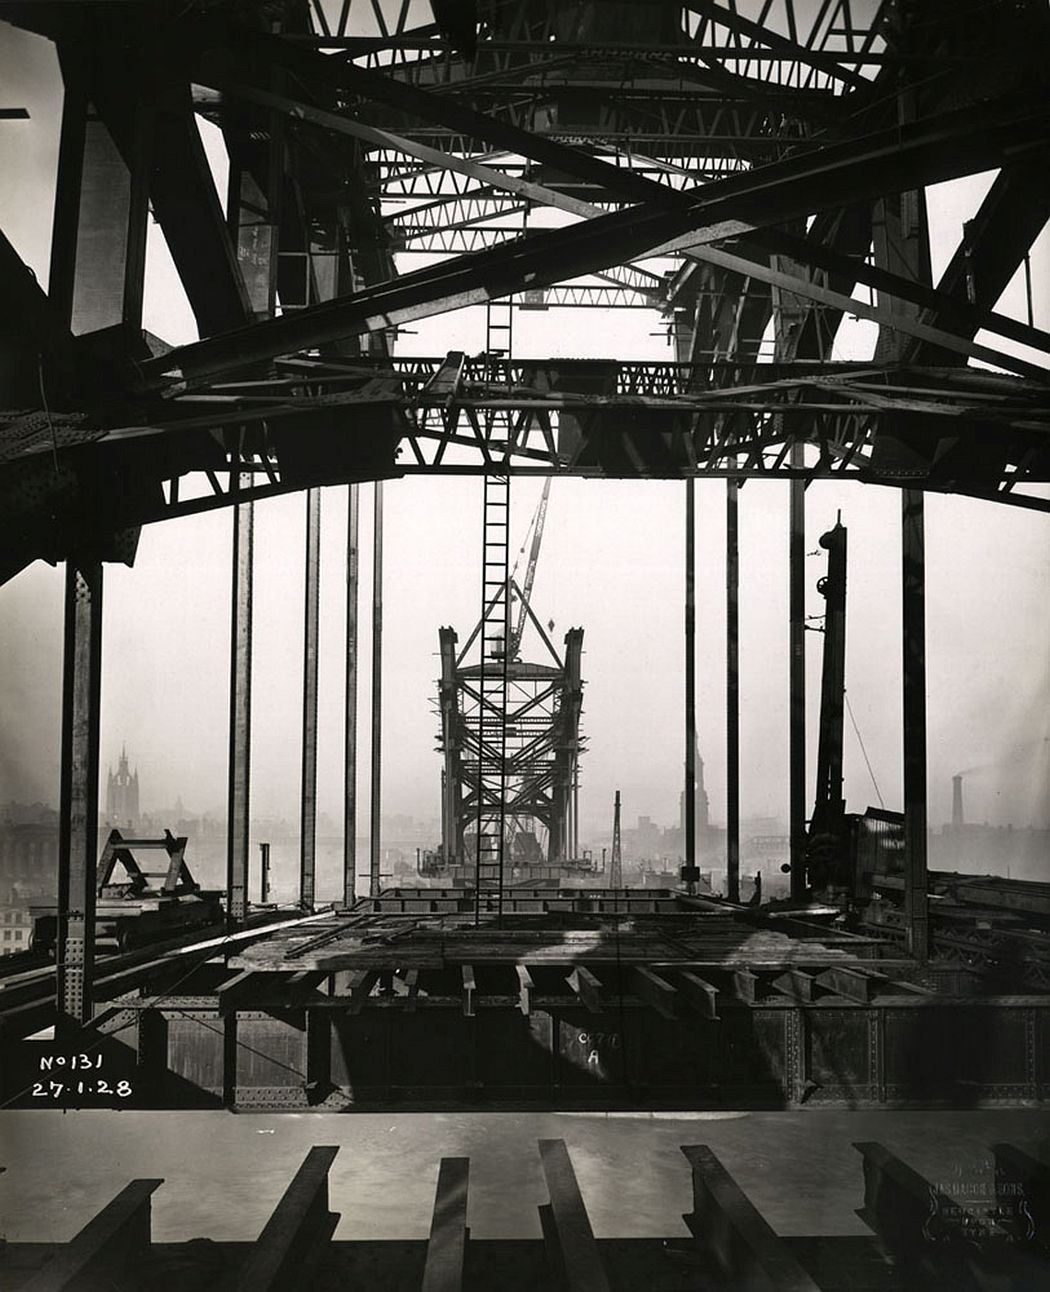 View through the girders from the Gateshead side of the Tyne Bridge to the Newcastle side, 27 January 1928